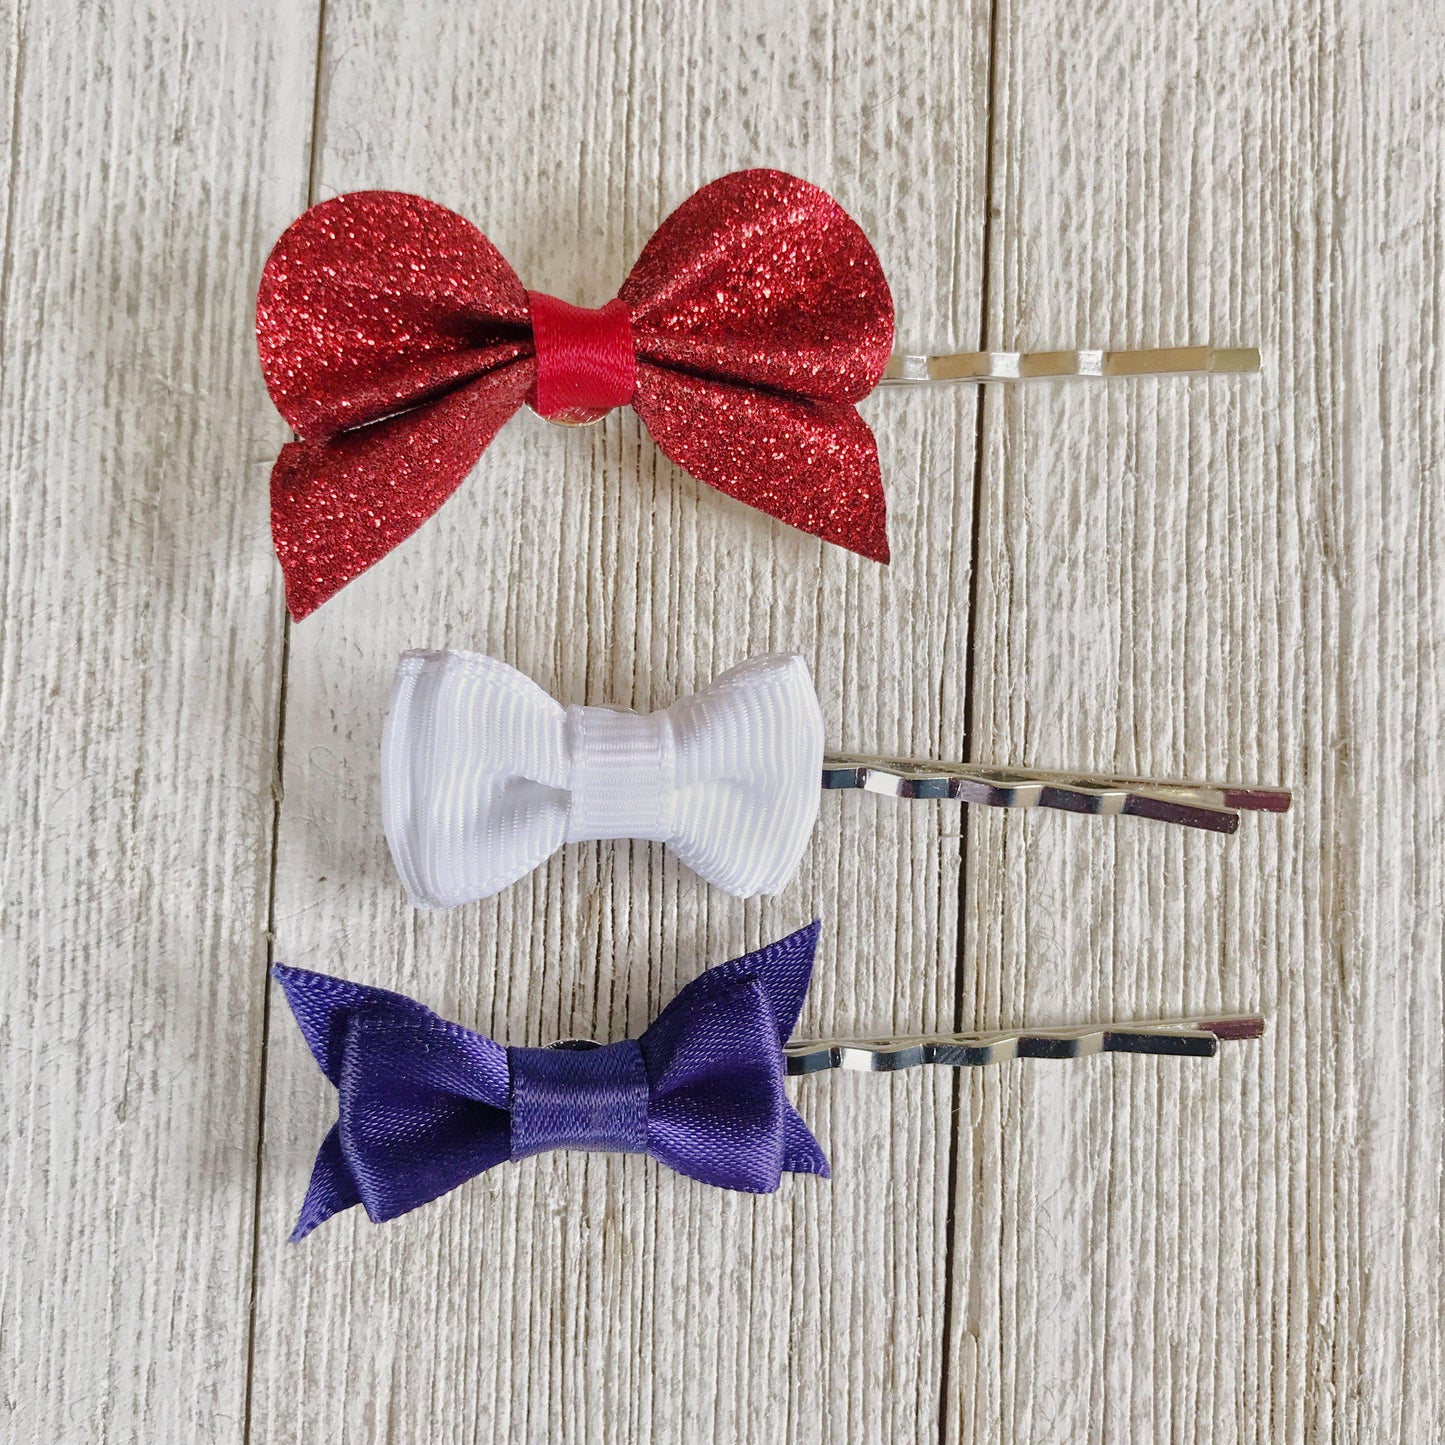 Set of 3 Patriotic Bow Hair Pins: Red, White & Blue Hair Accessories